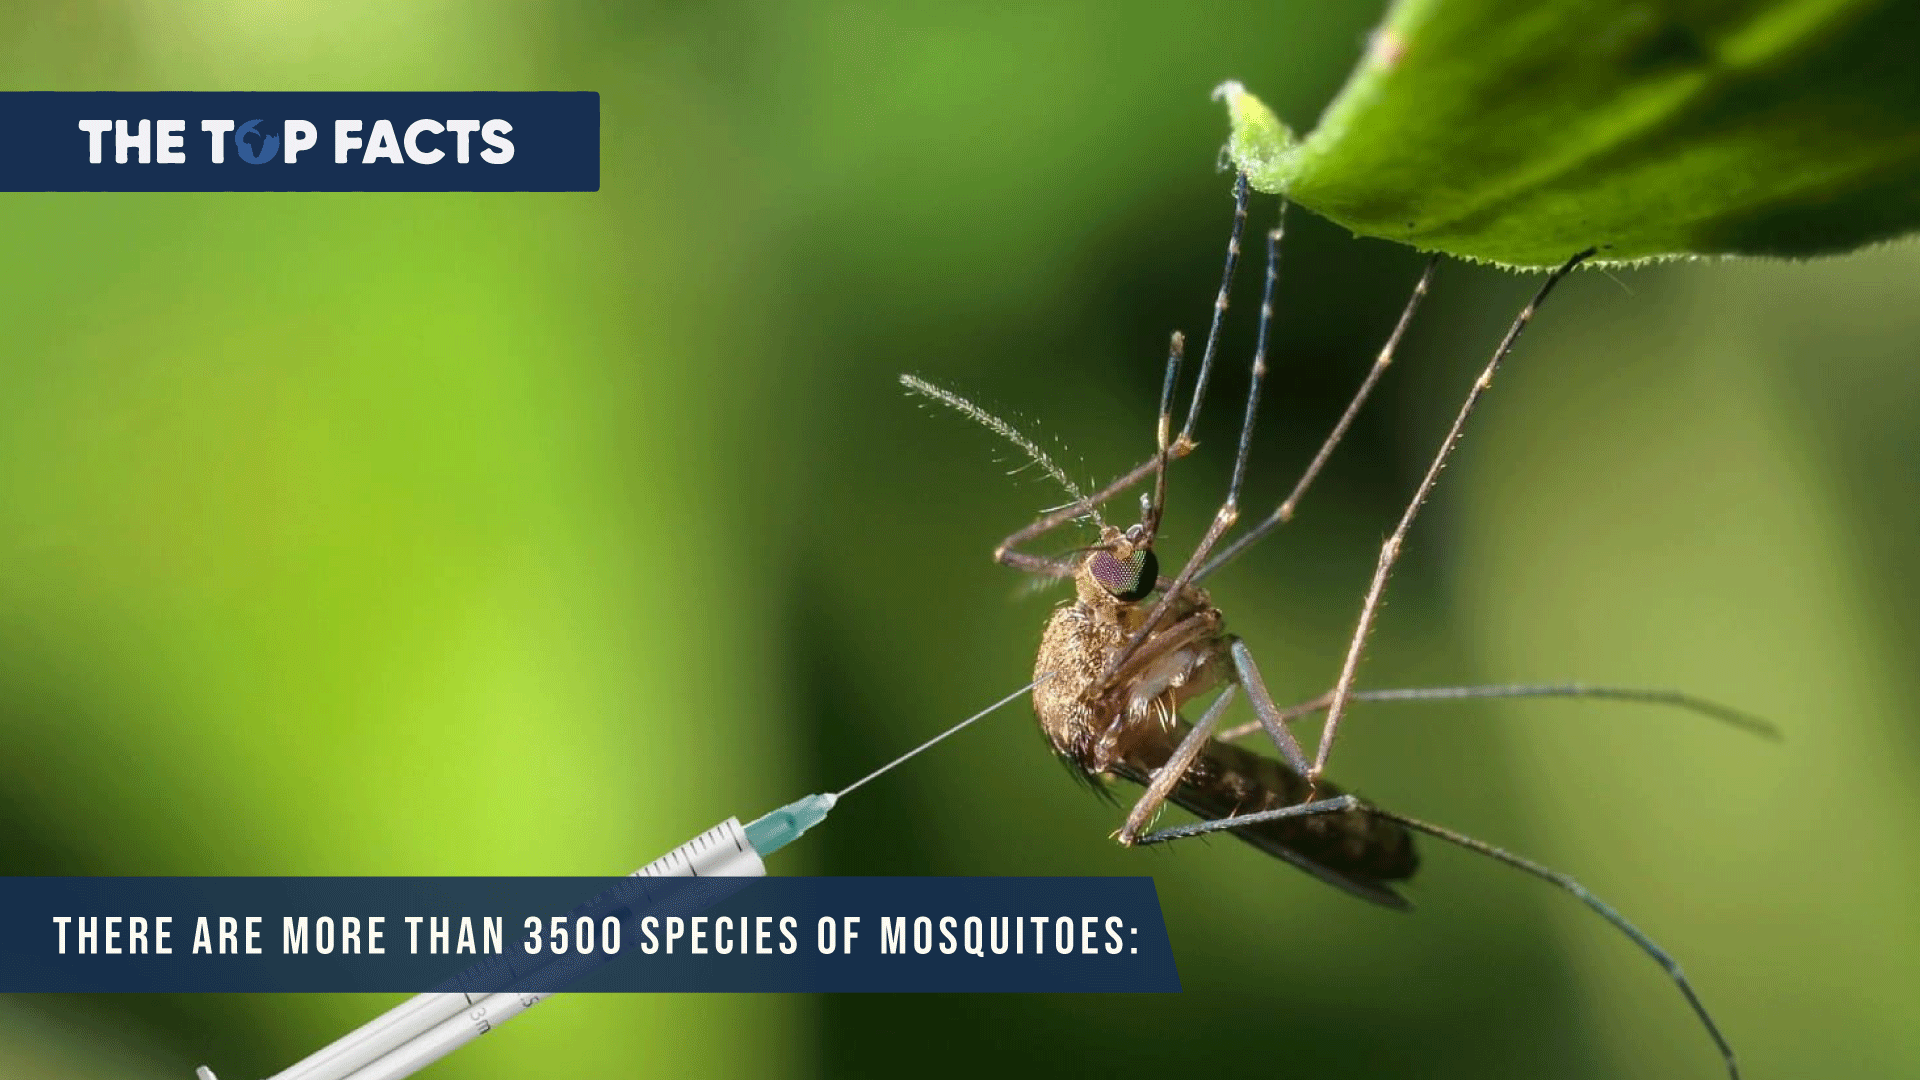 There are more than 3500 species of mosquitoes